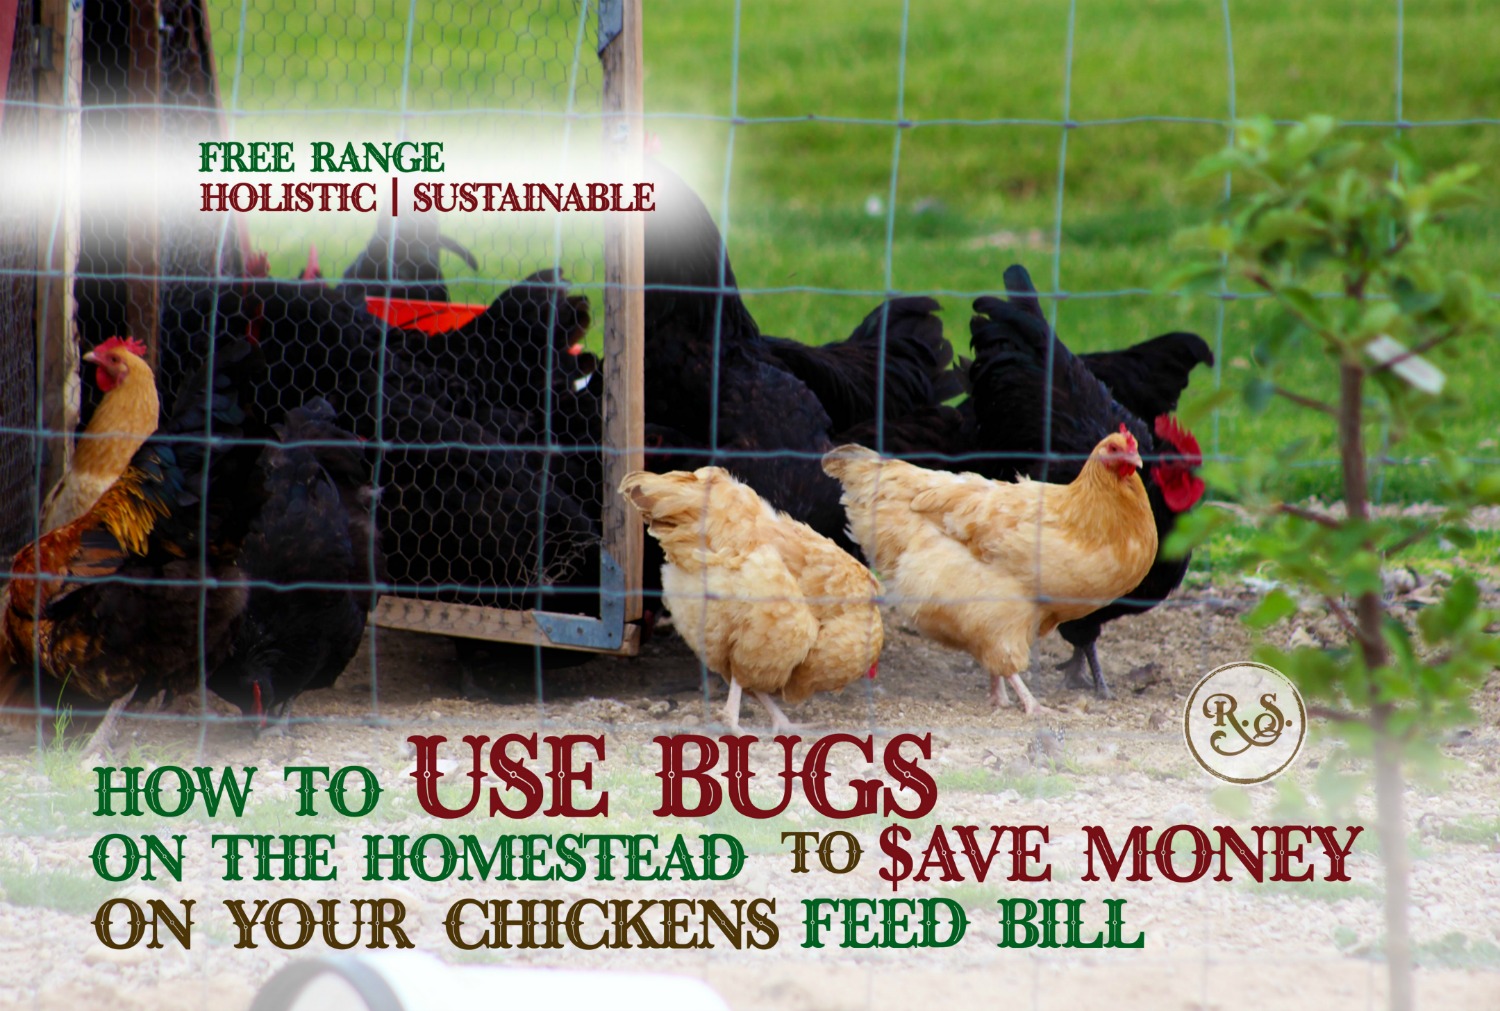 Manage your chickens to eat bugs around your homestead and save money on their feed bill. Small changes are how you get raise sustainable chickens. Your backyard chickens will love the freedom too.